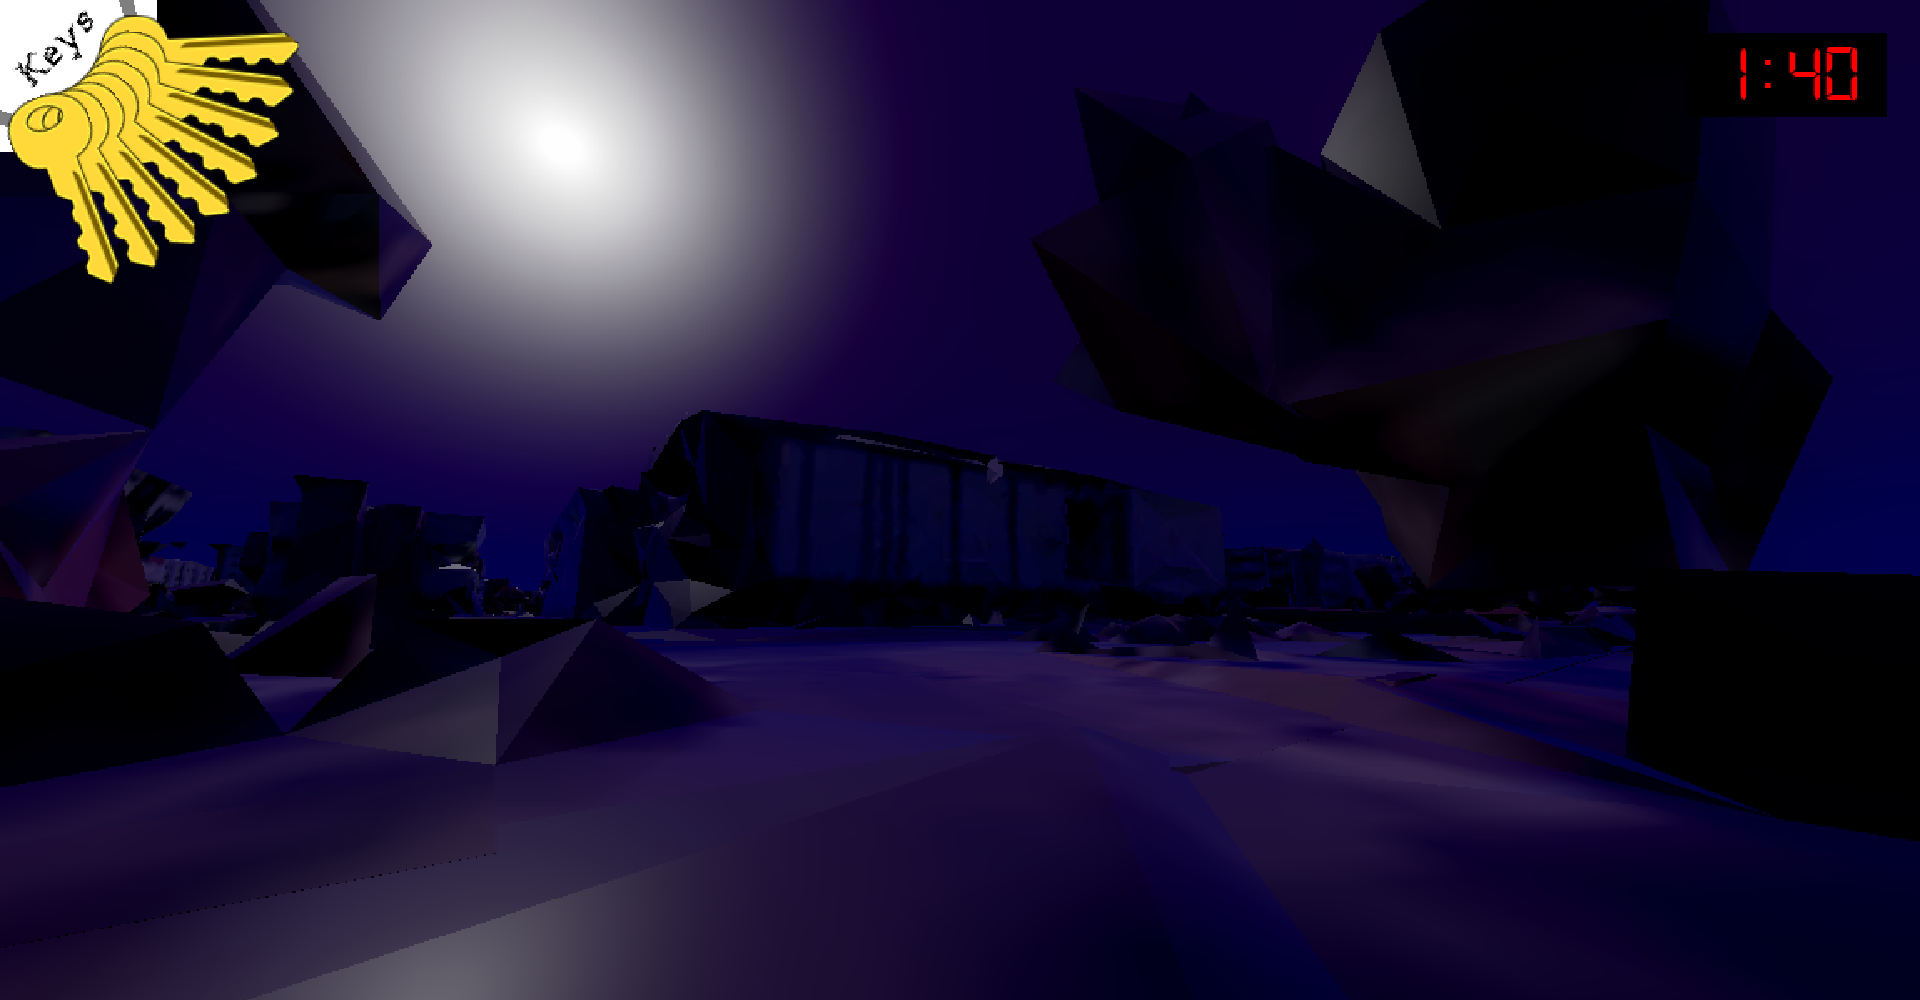 Overlooking a low poly campus. It is 1:40AM and the player has several keys.